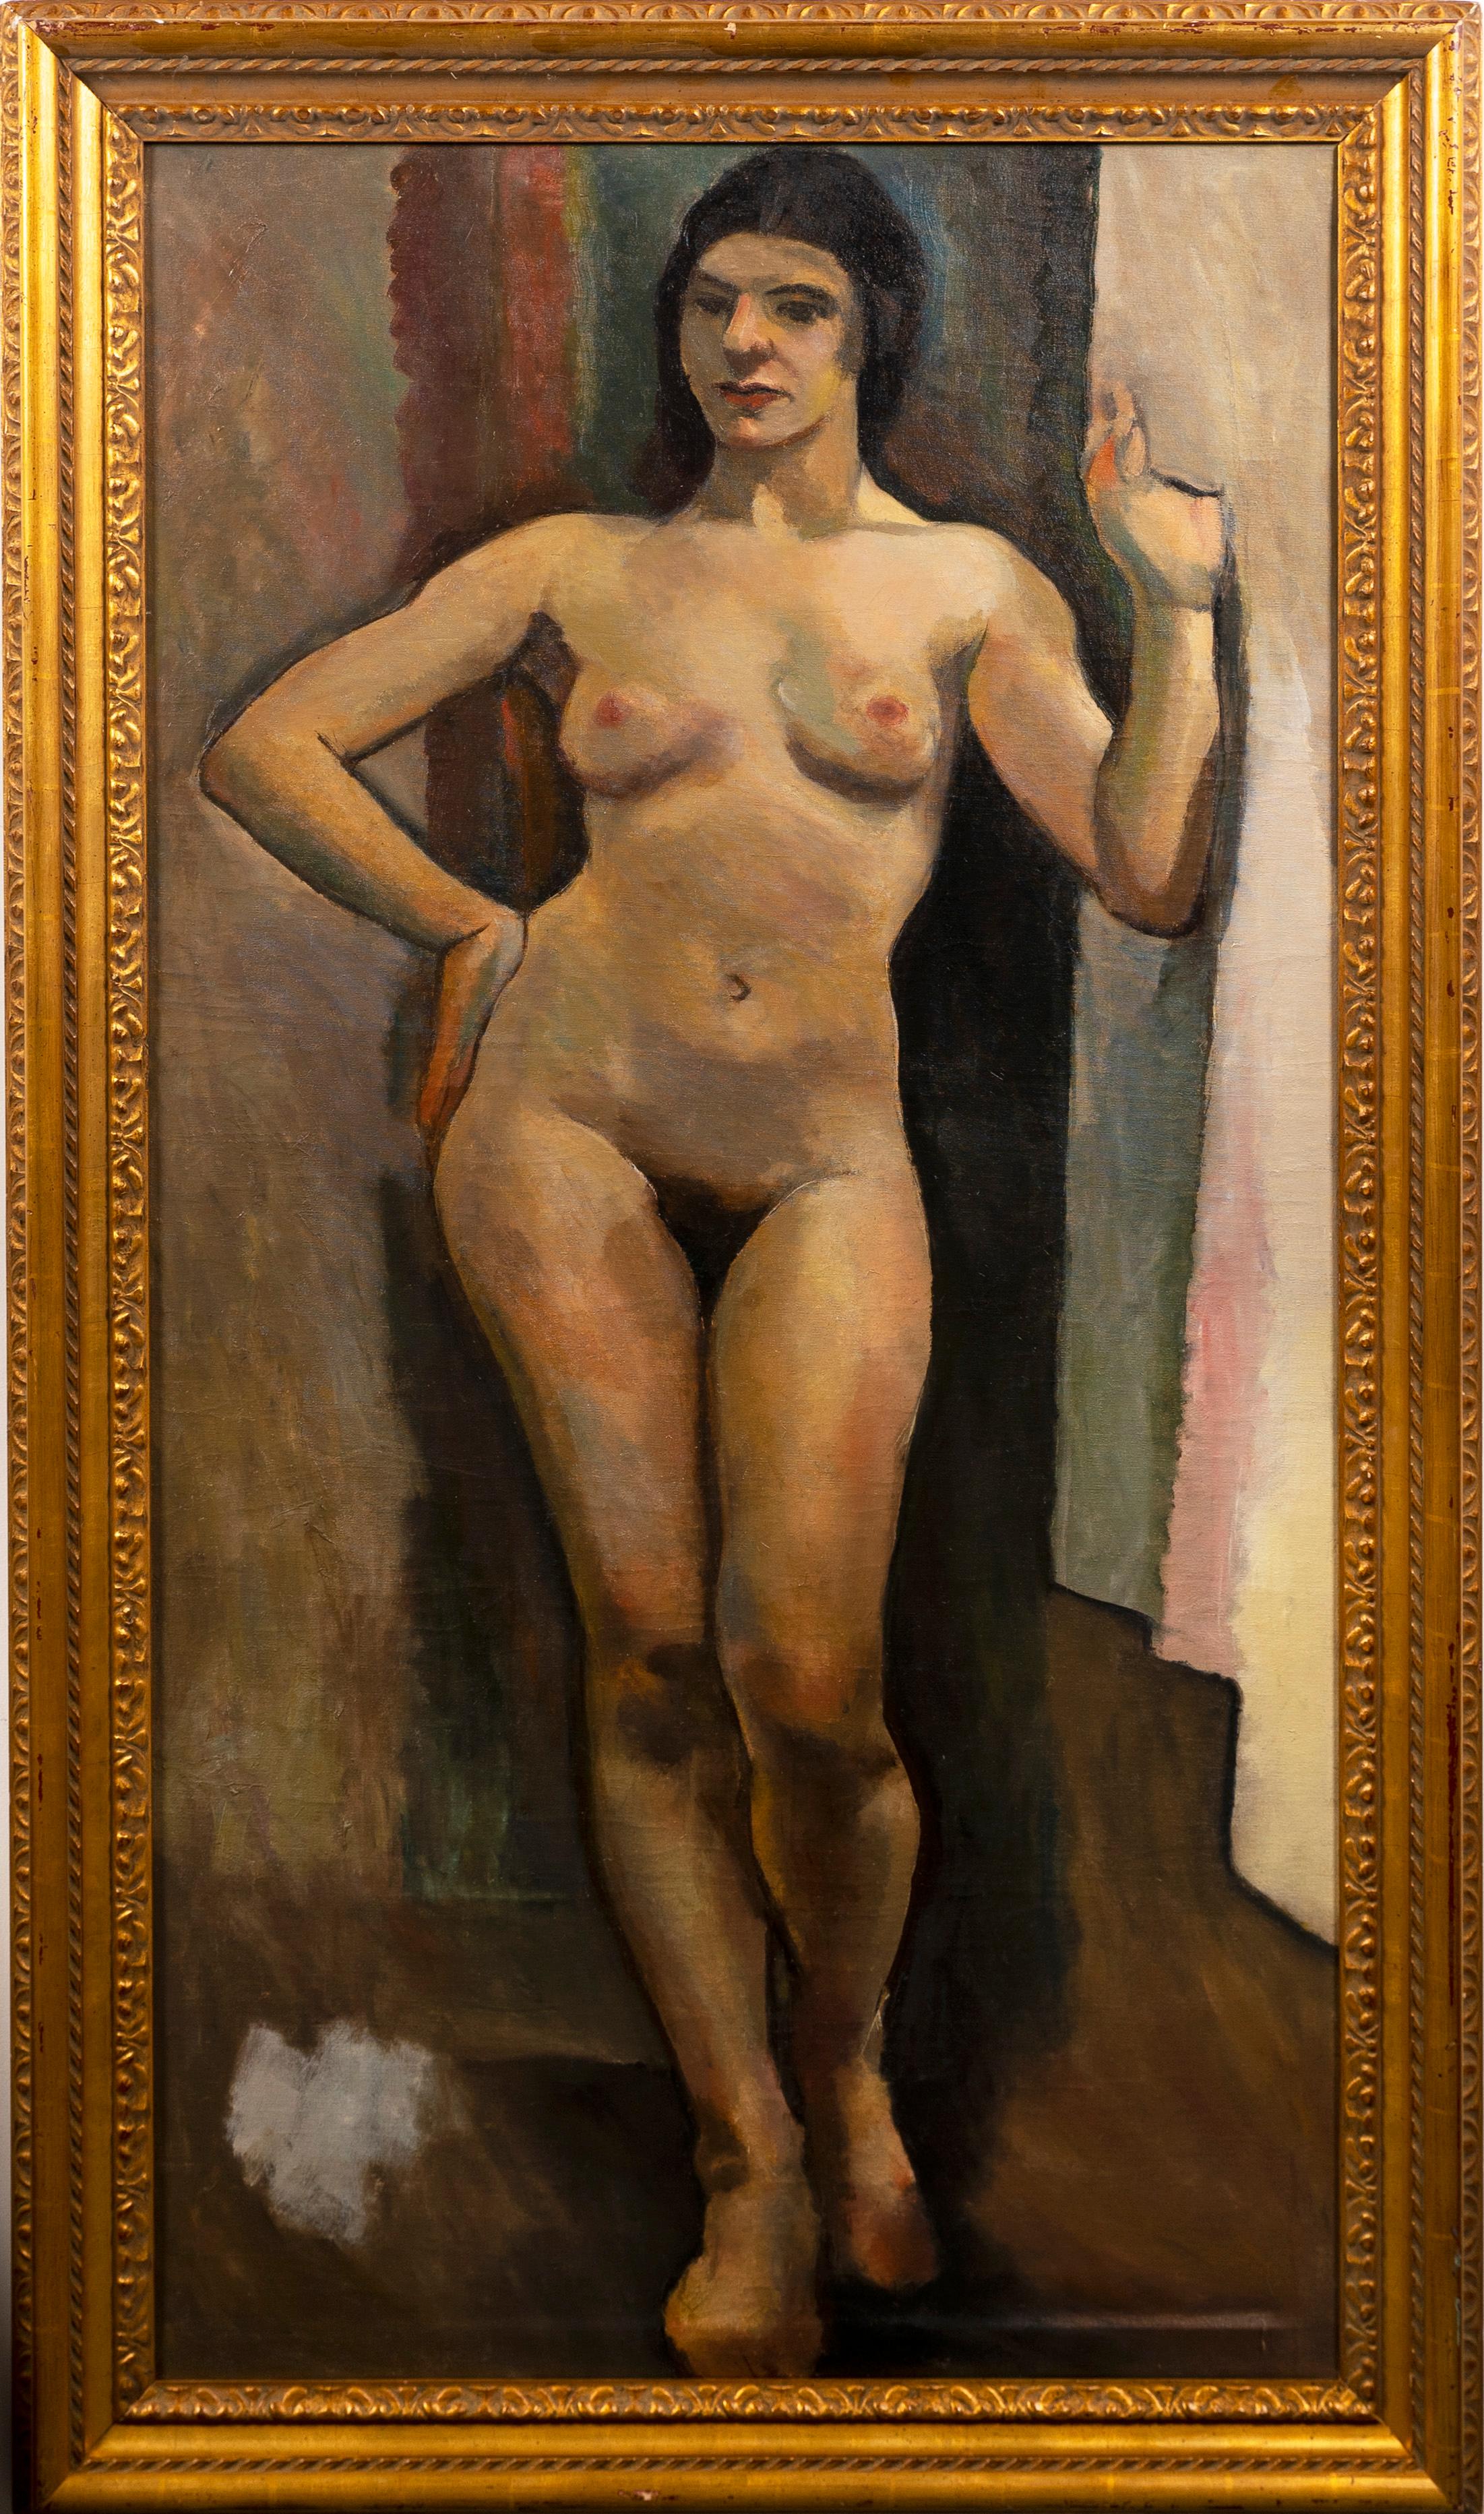 Unknown Interior Painting - Antique American Life Size Huge WPA Nude Woman Artist Studio Portrait Painting 